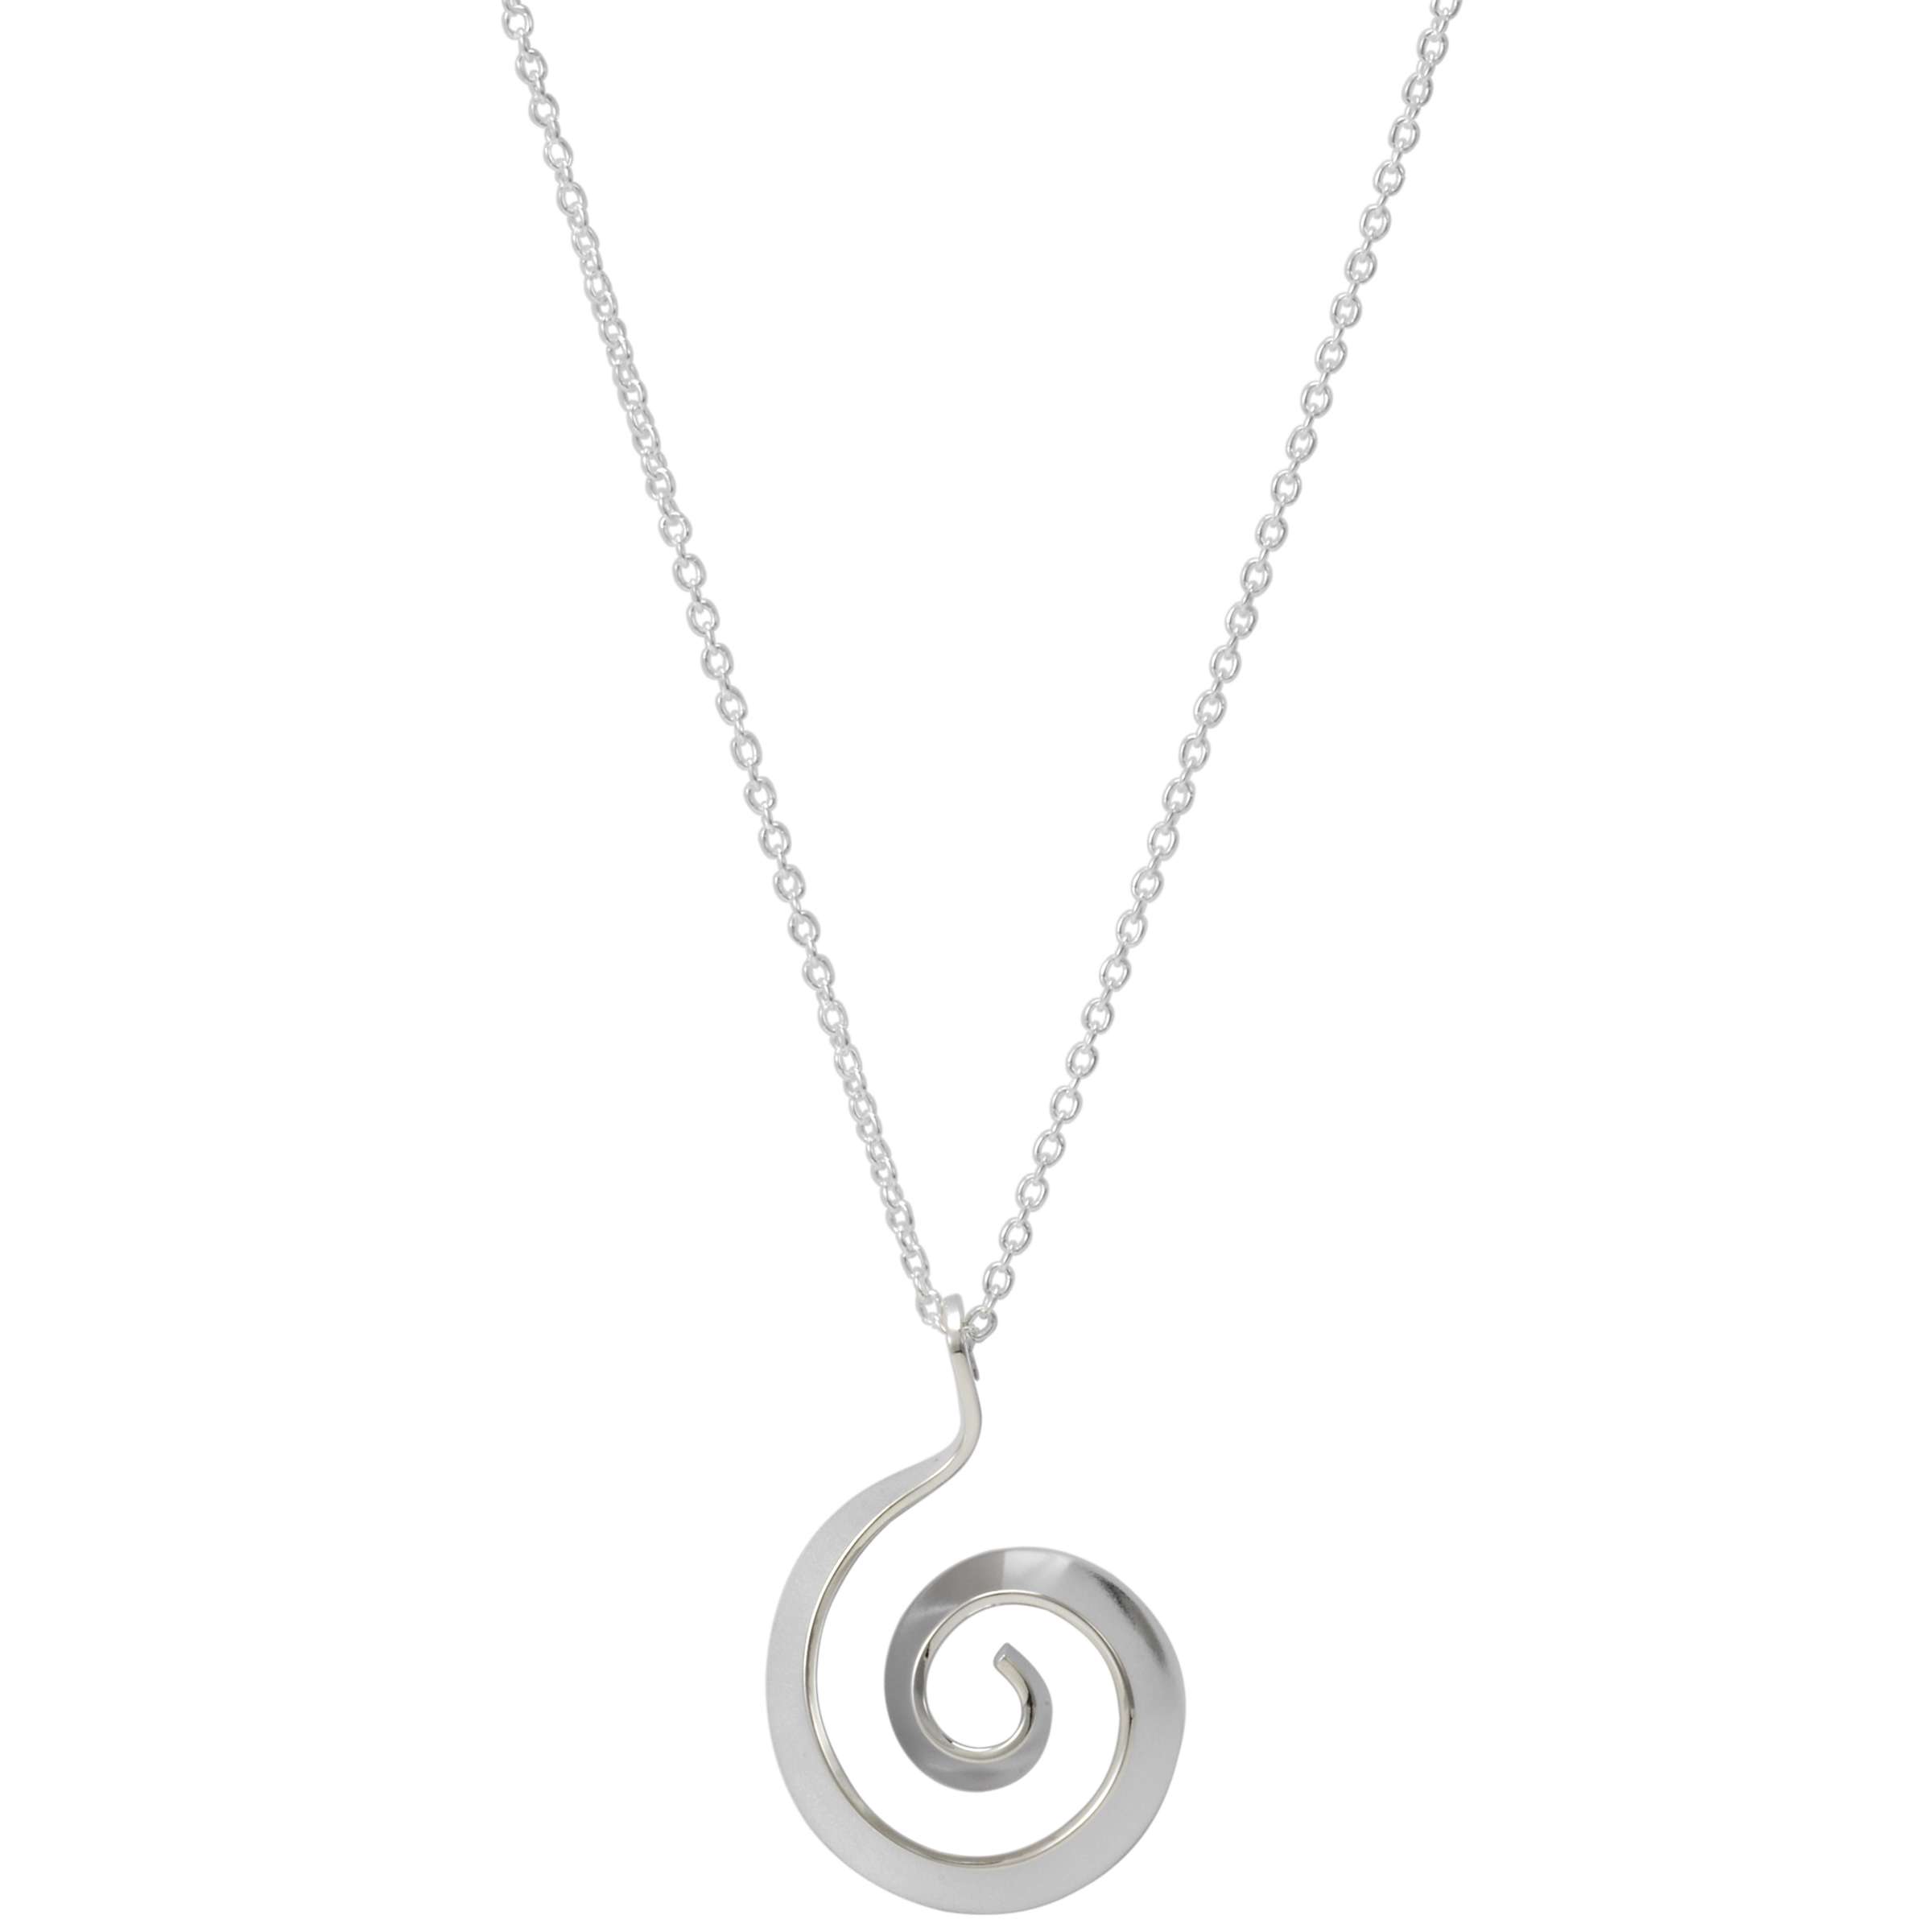 Buy Andea Swirl Pendant Necklace, Silver Online at johnlewis.com